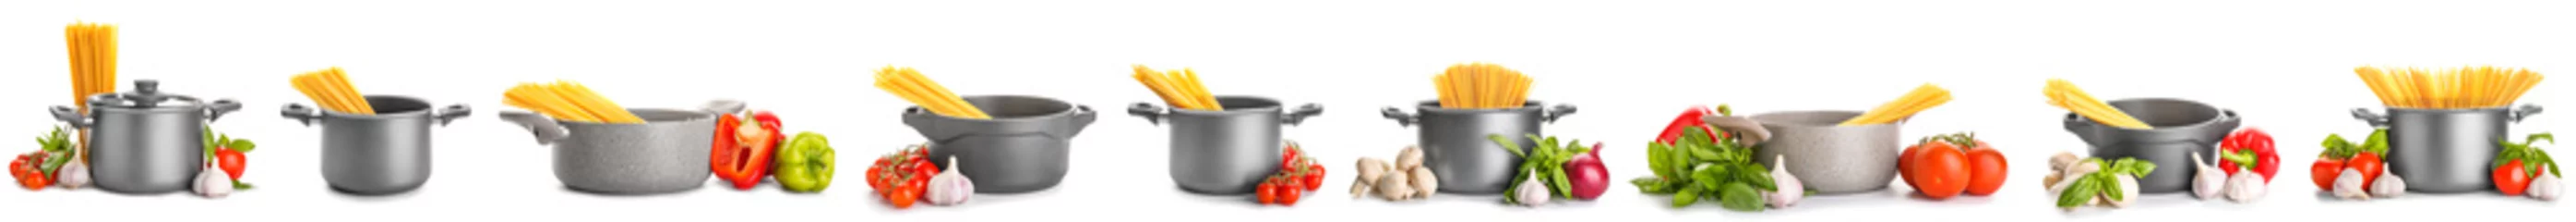 Photo sur Plexiglas Légumes frais Collage of cooking pots with raw pasta and vegetables on white background